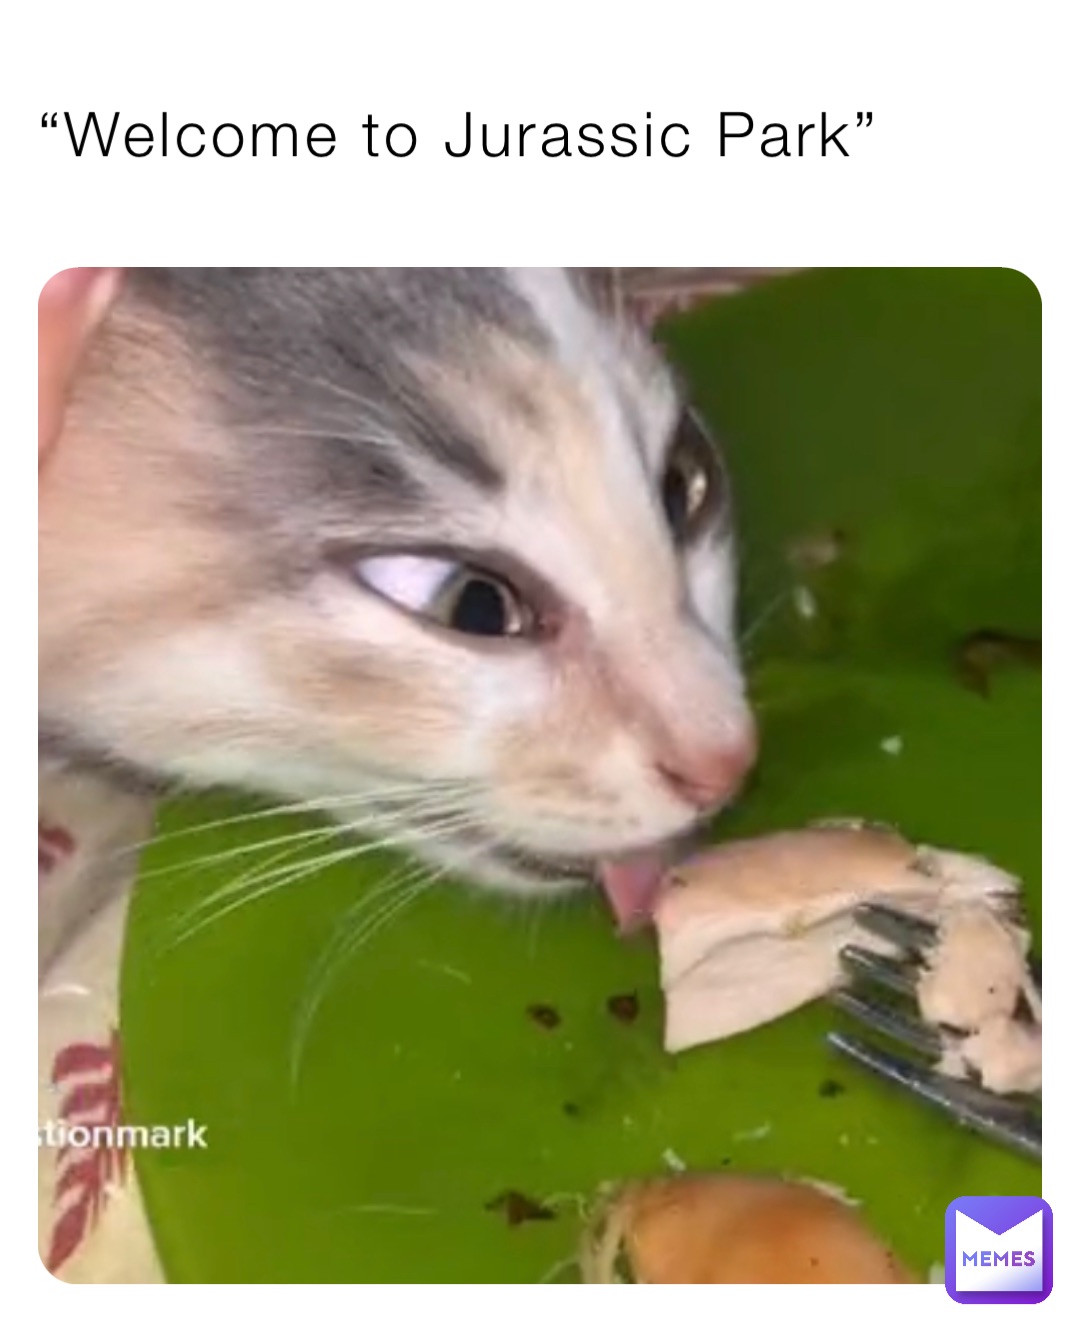 “Welcome to Jurassic Park”